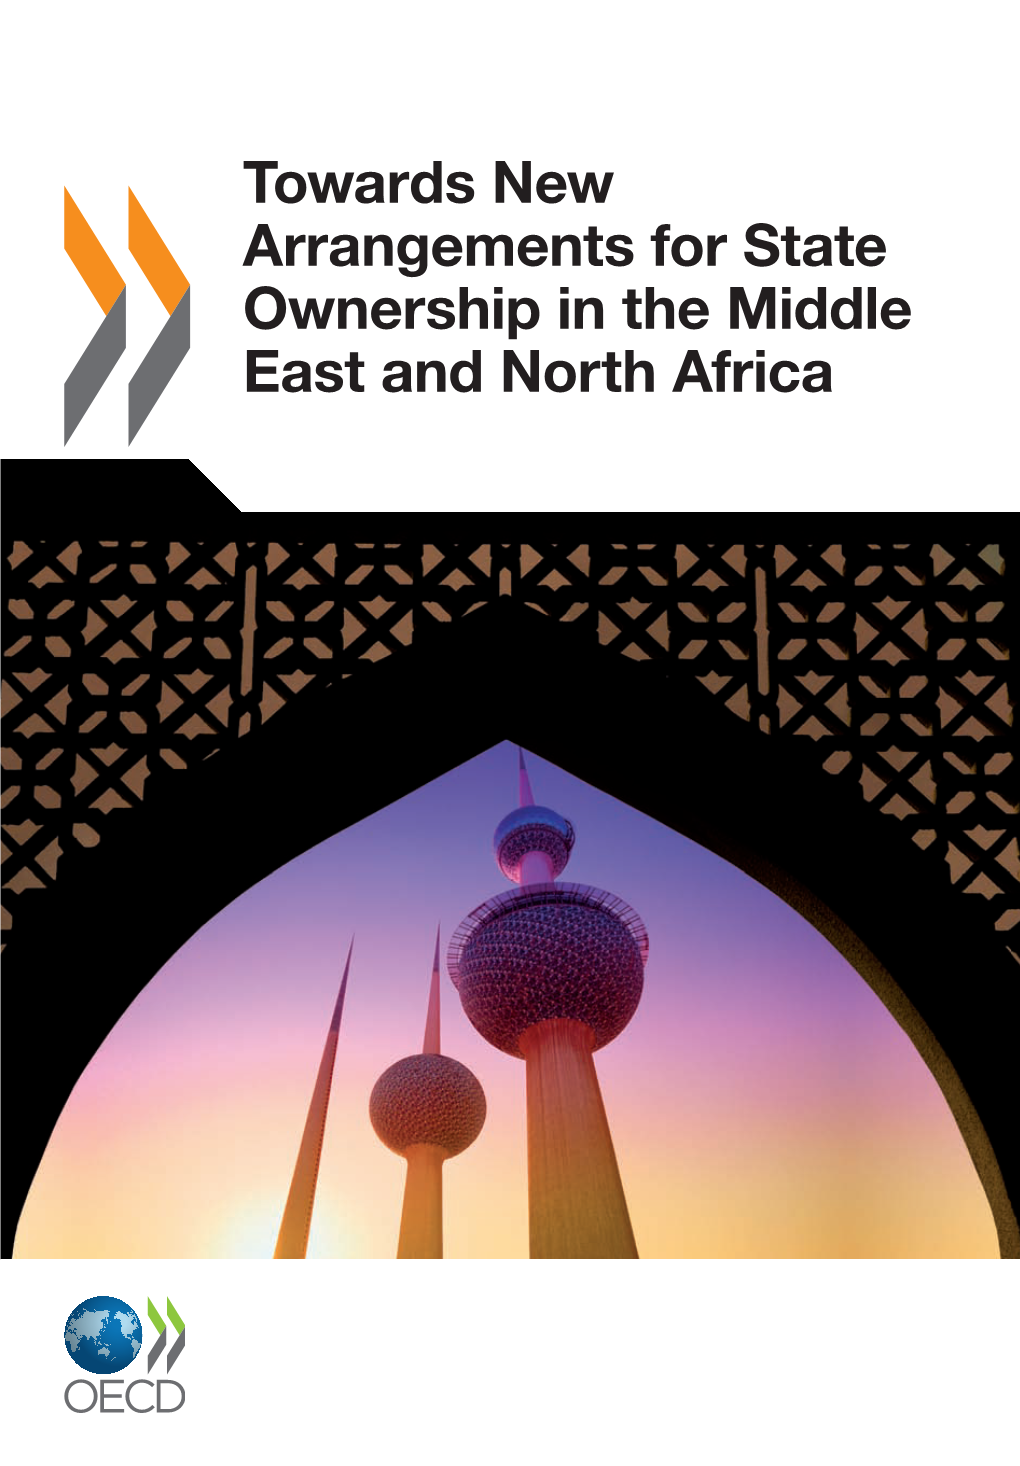 Towards New Arrangements for State Ownership in the Middle East and North Africa